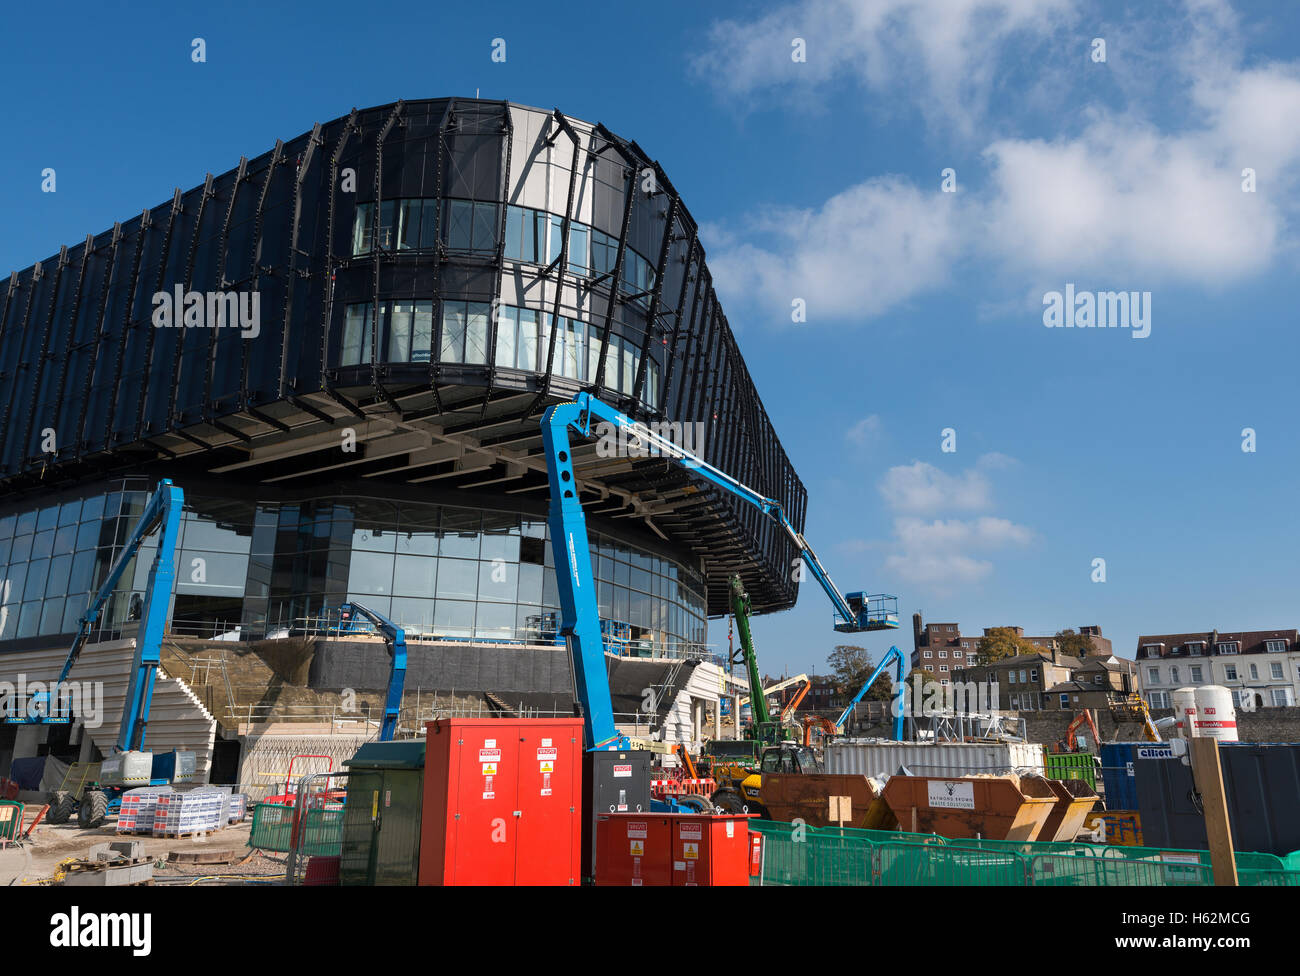 The construction of the WestQuay Watermark development in Southampton city centre in Hampshire, England, UK 23rd October 2016 Stock Photo